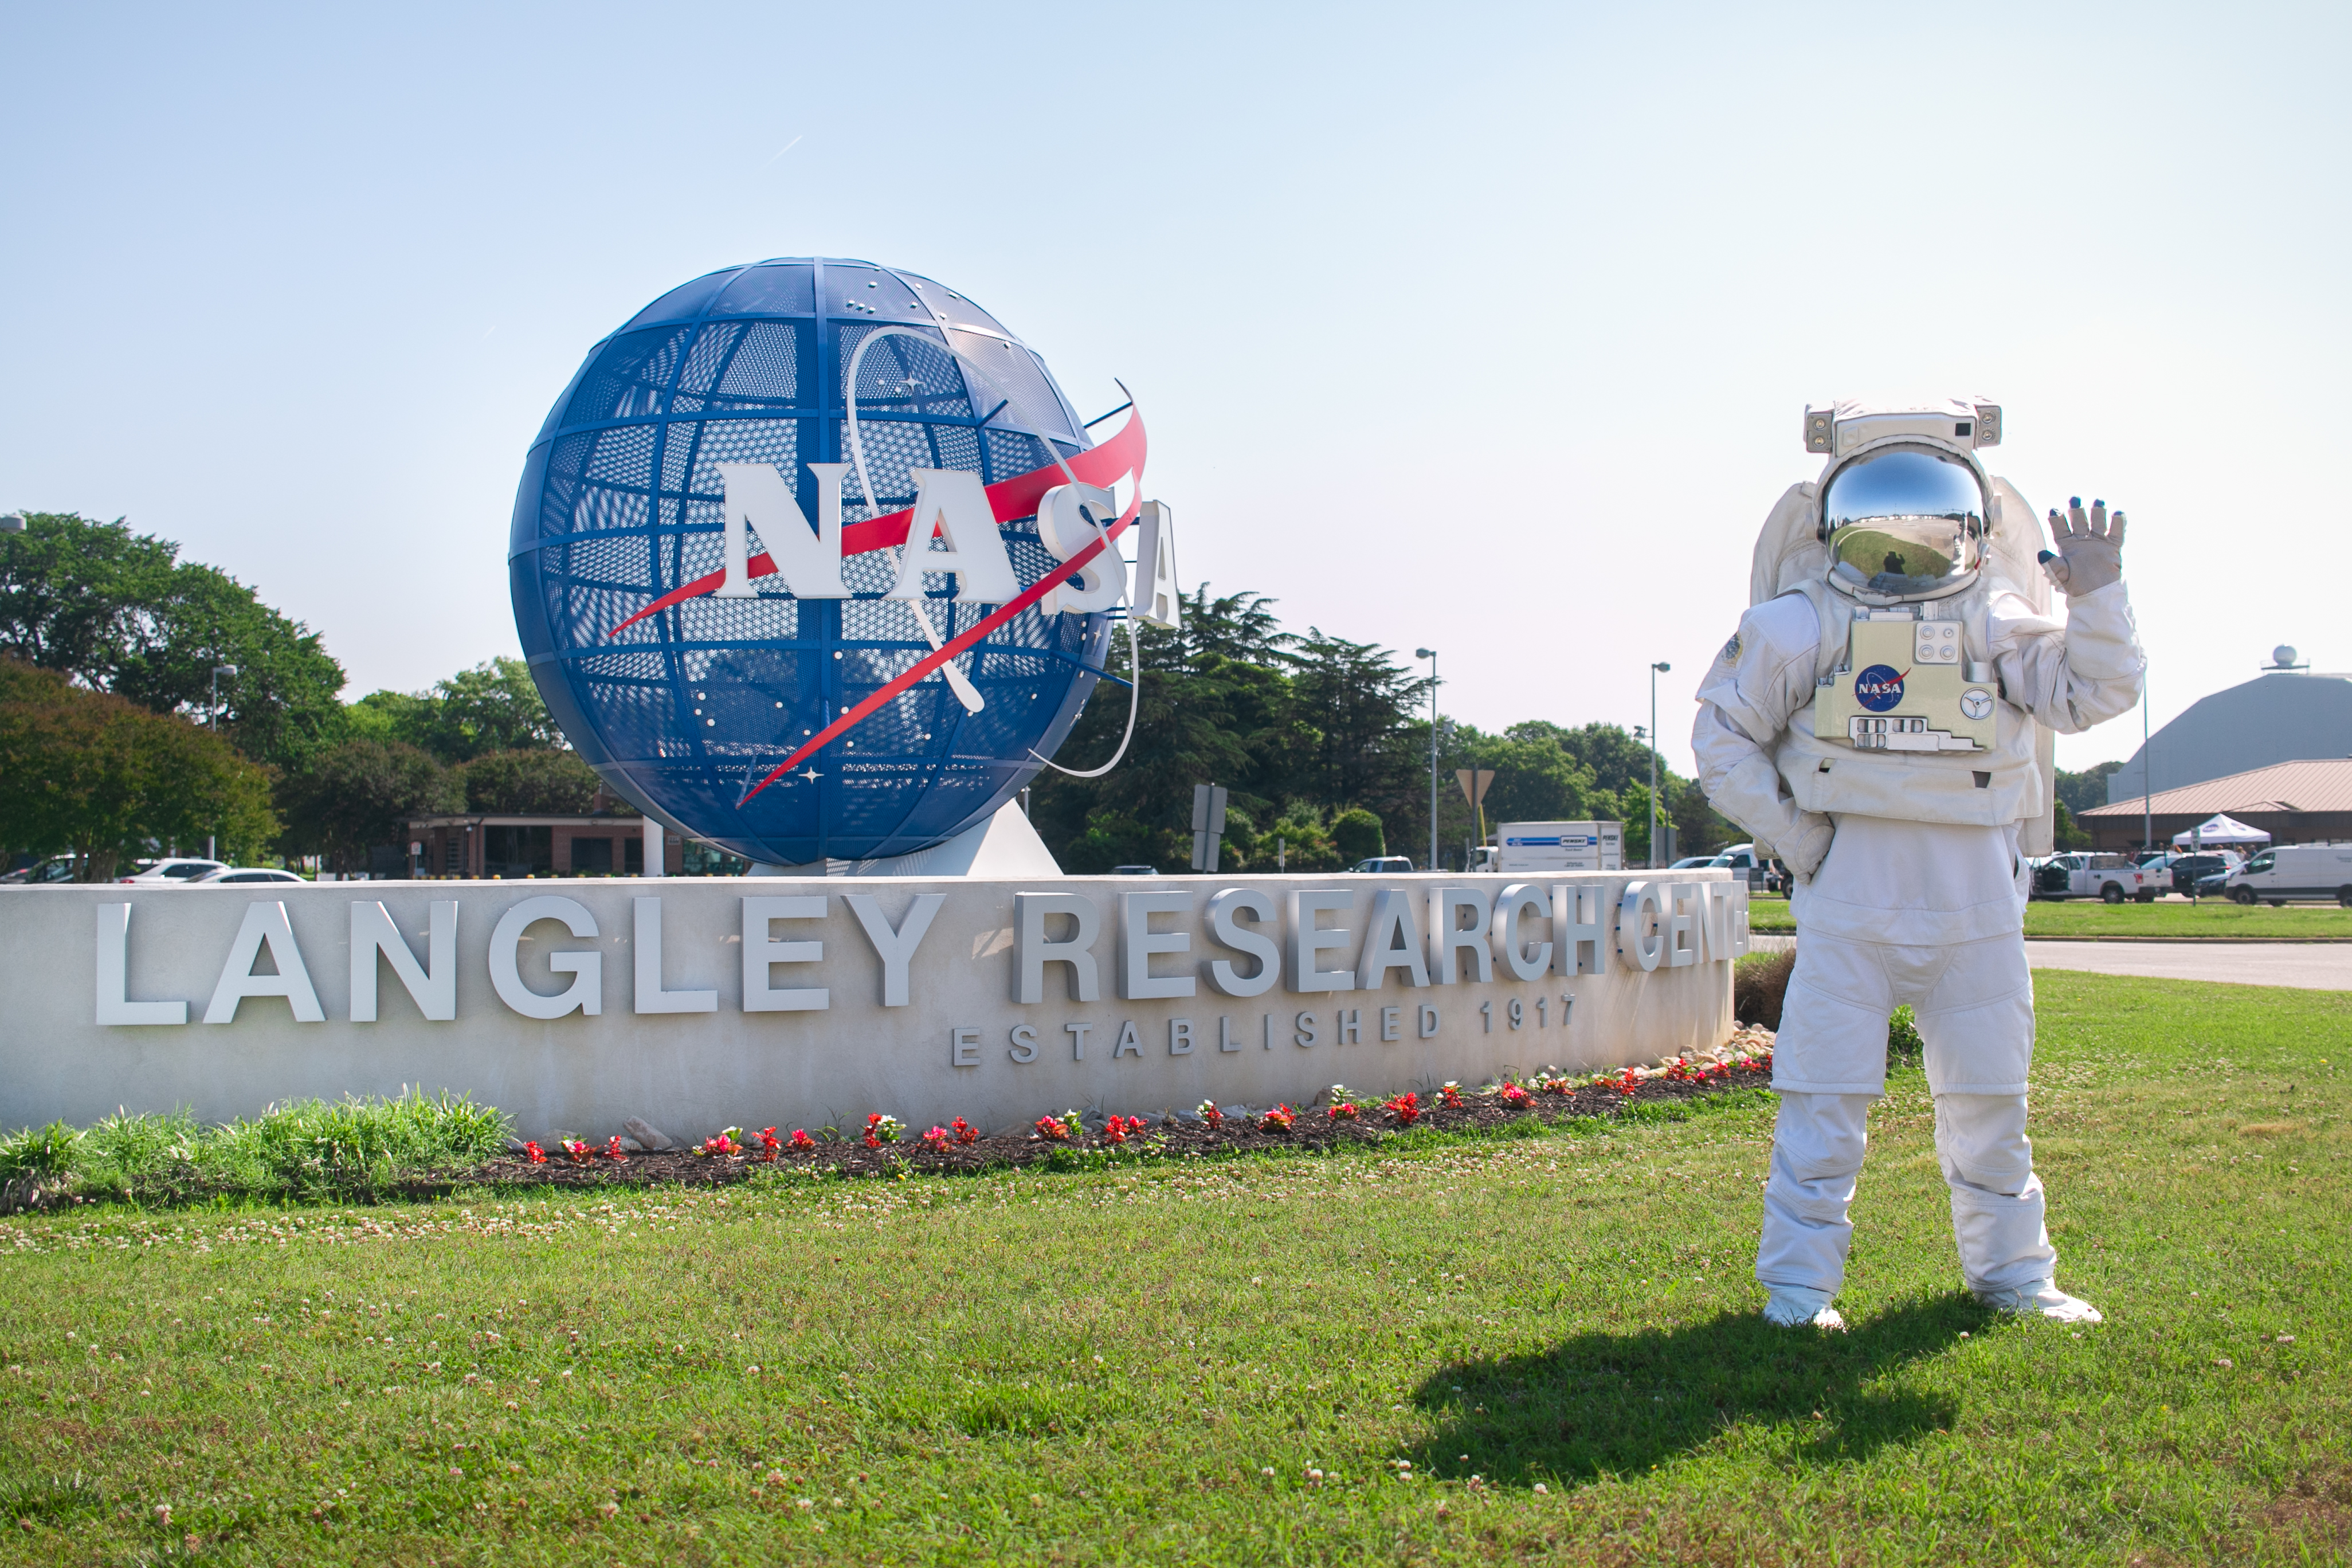 A NASA employee wears an astronaut suit and stands on bright green and freshly cut grass in front of the welcome sign at NASA Langley Research Center. The welcome sign features a large, blue globe with the NASA insiginia on it and text on a long stone ridge that reads "Langley Research Center." Flowers line the edge of the stone ridge.